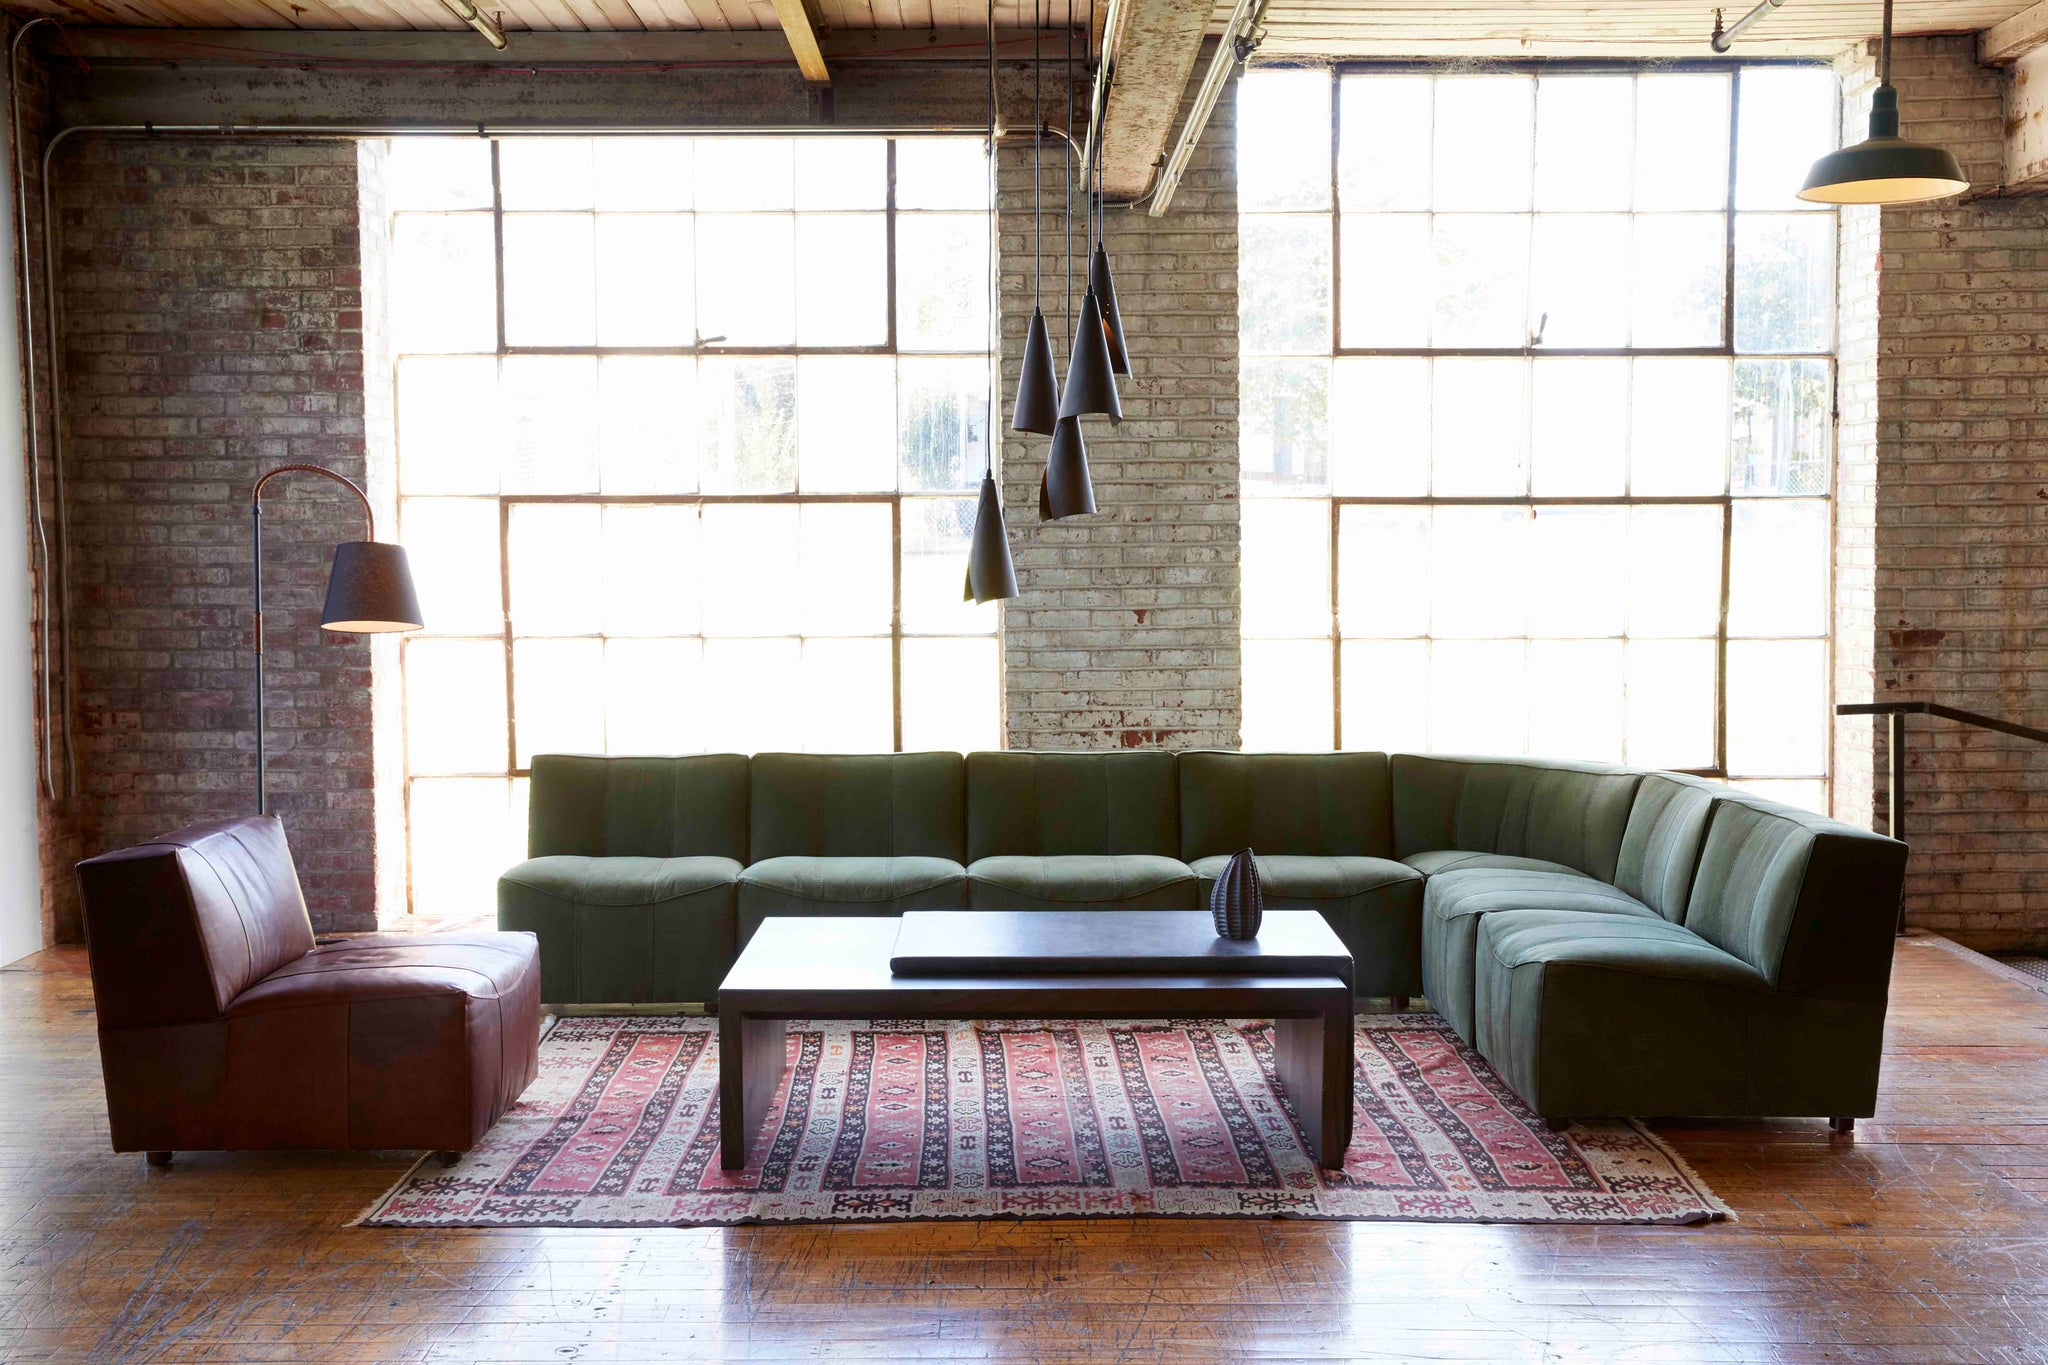  Century Sectional sits in the middle of a room with a wood coffee table and a leather chair. There is also a red patterned rug underneath the pieces. In the background is a brick wall with large windows. Above the pieces hangs multiple lighting lamps. Photographed in Hunter Green. 